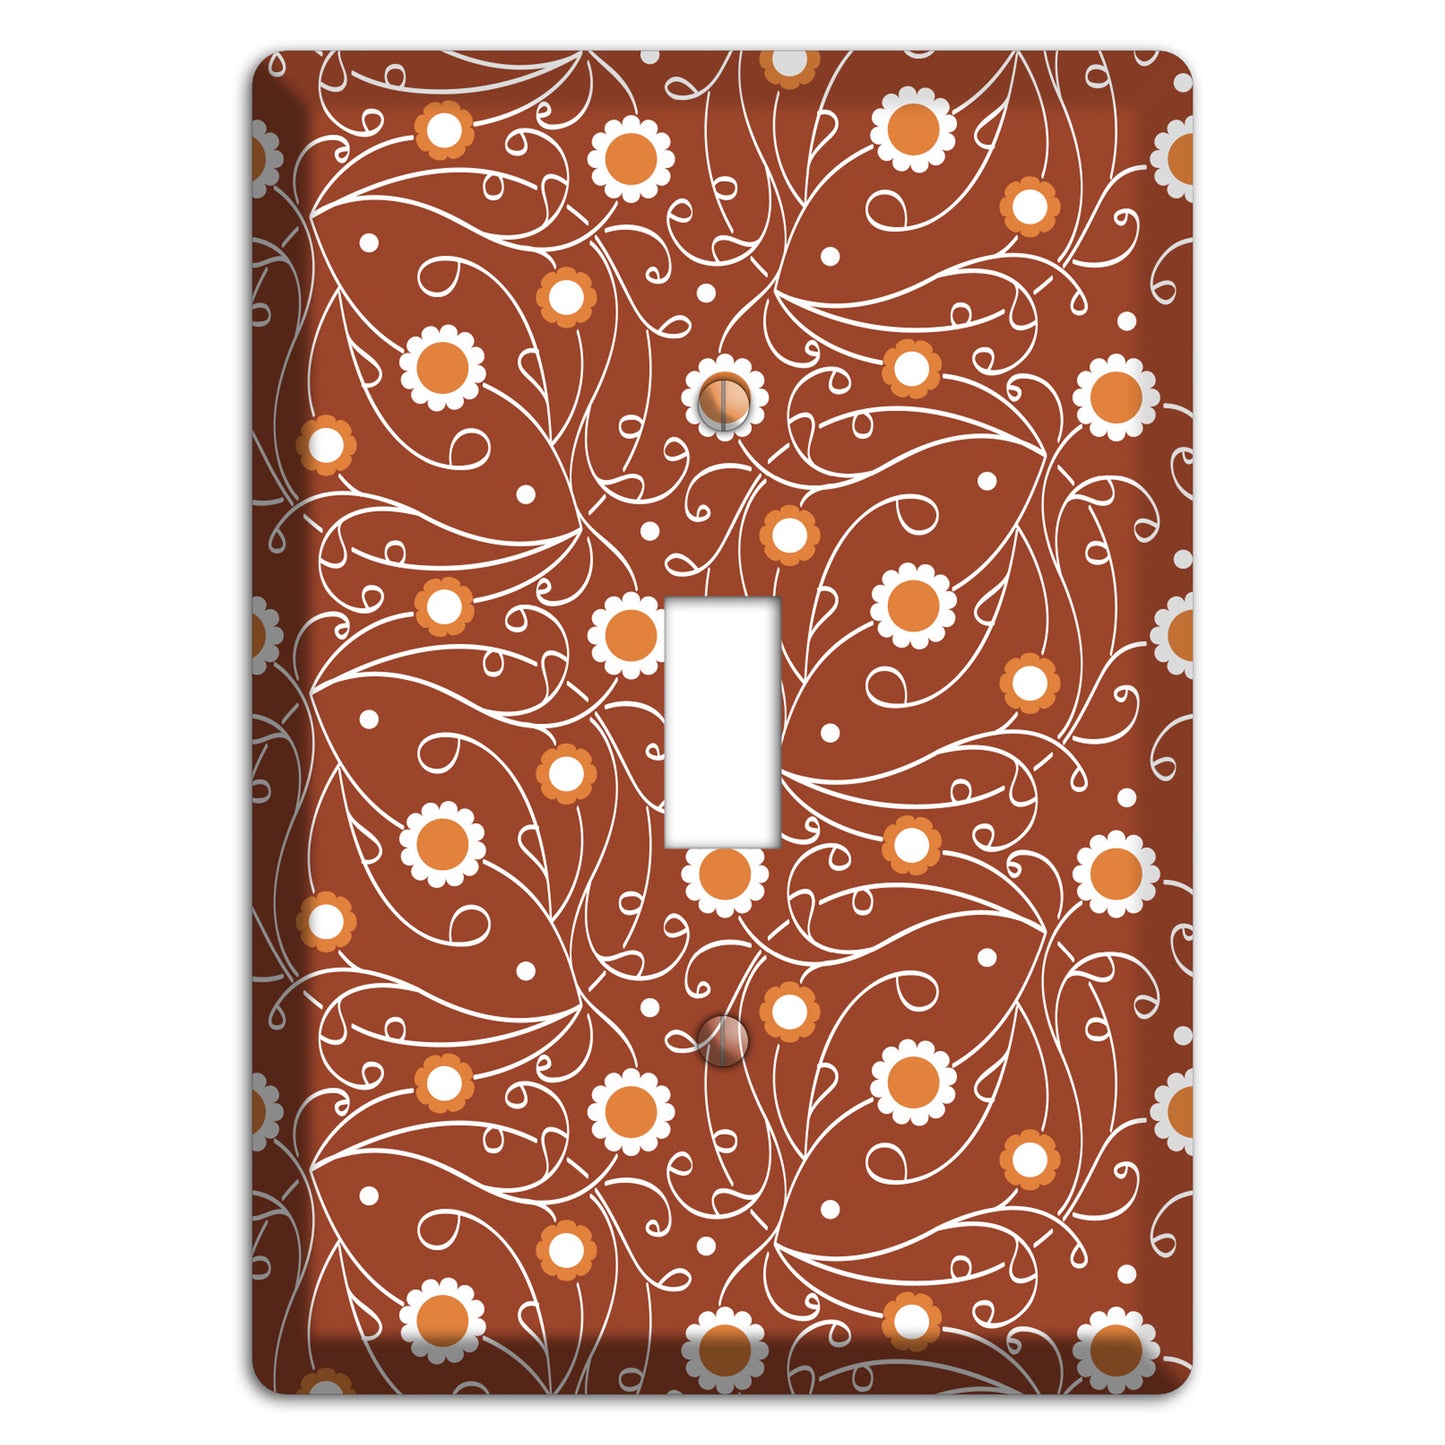 Brown Vine Floral Cover Plates